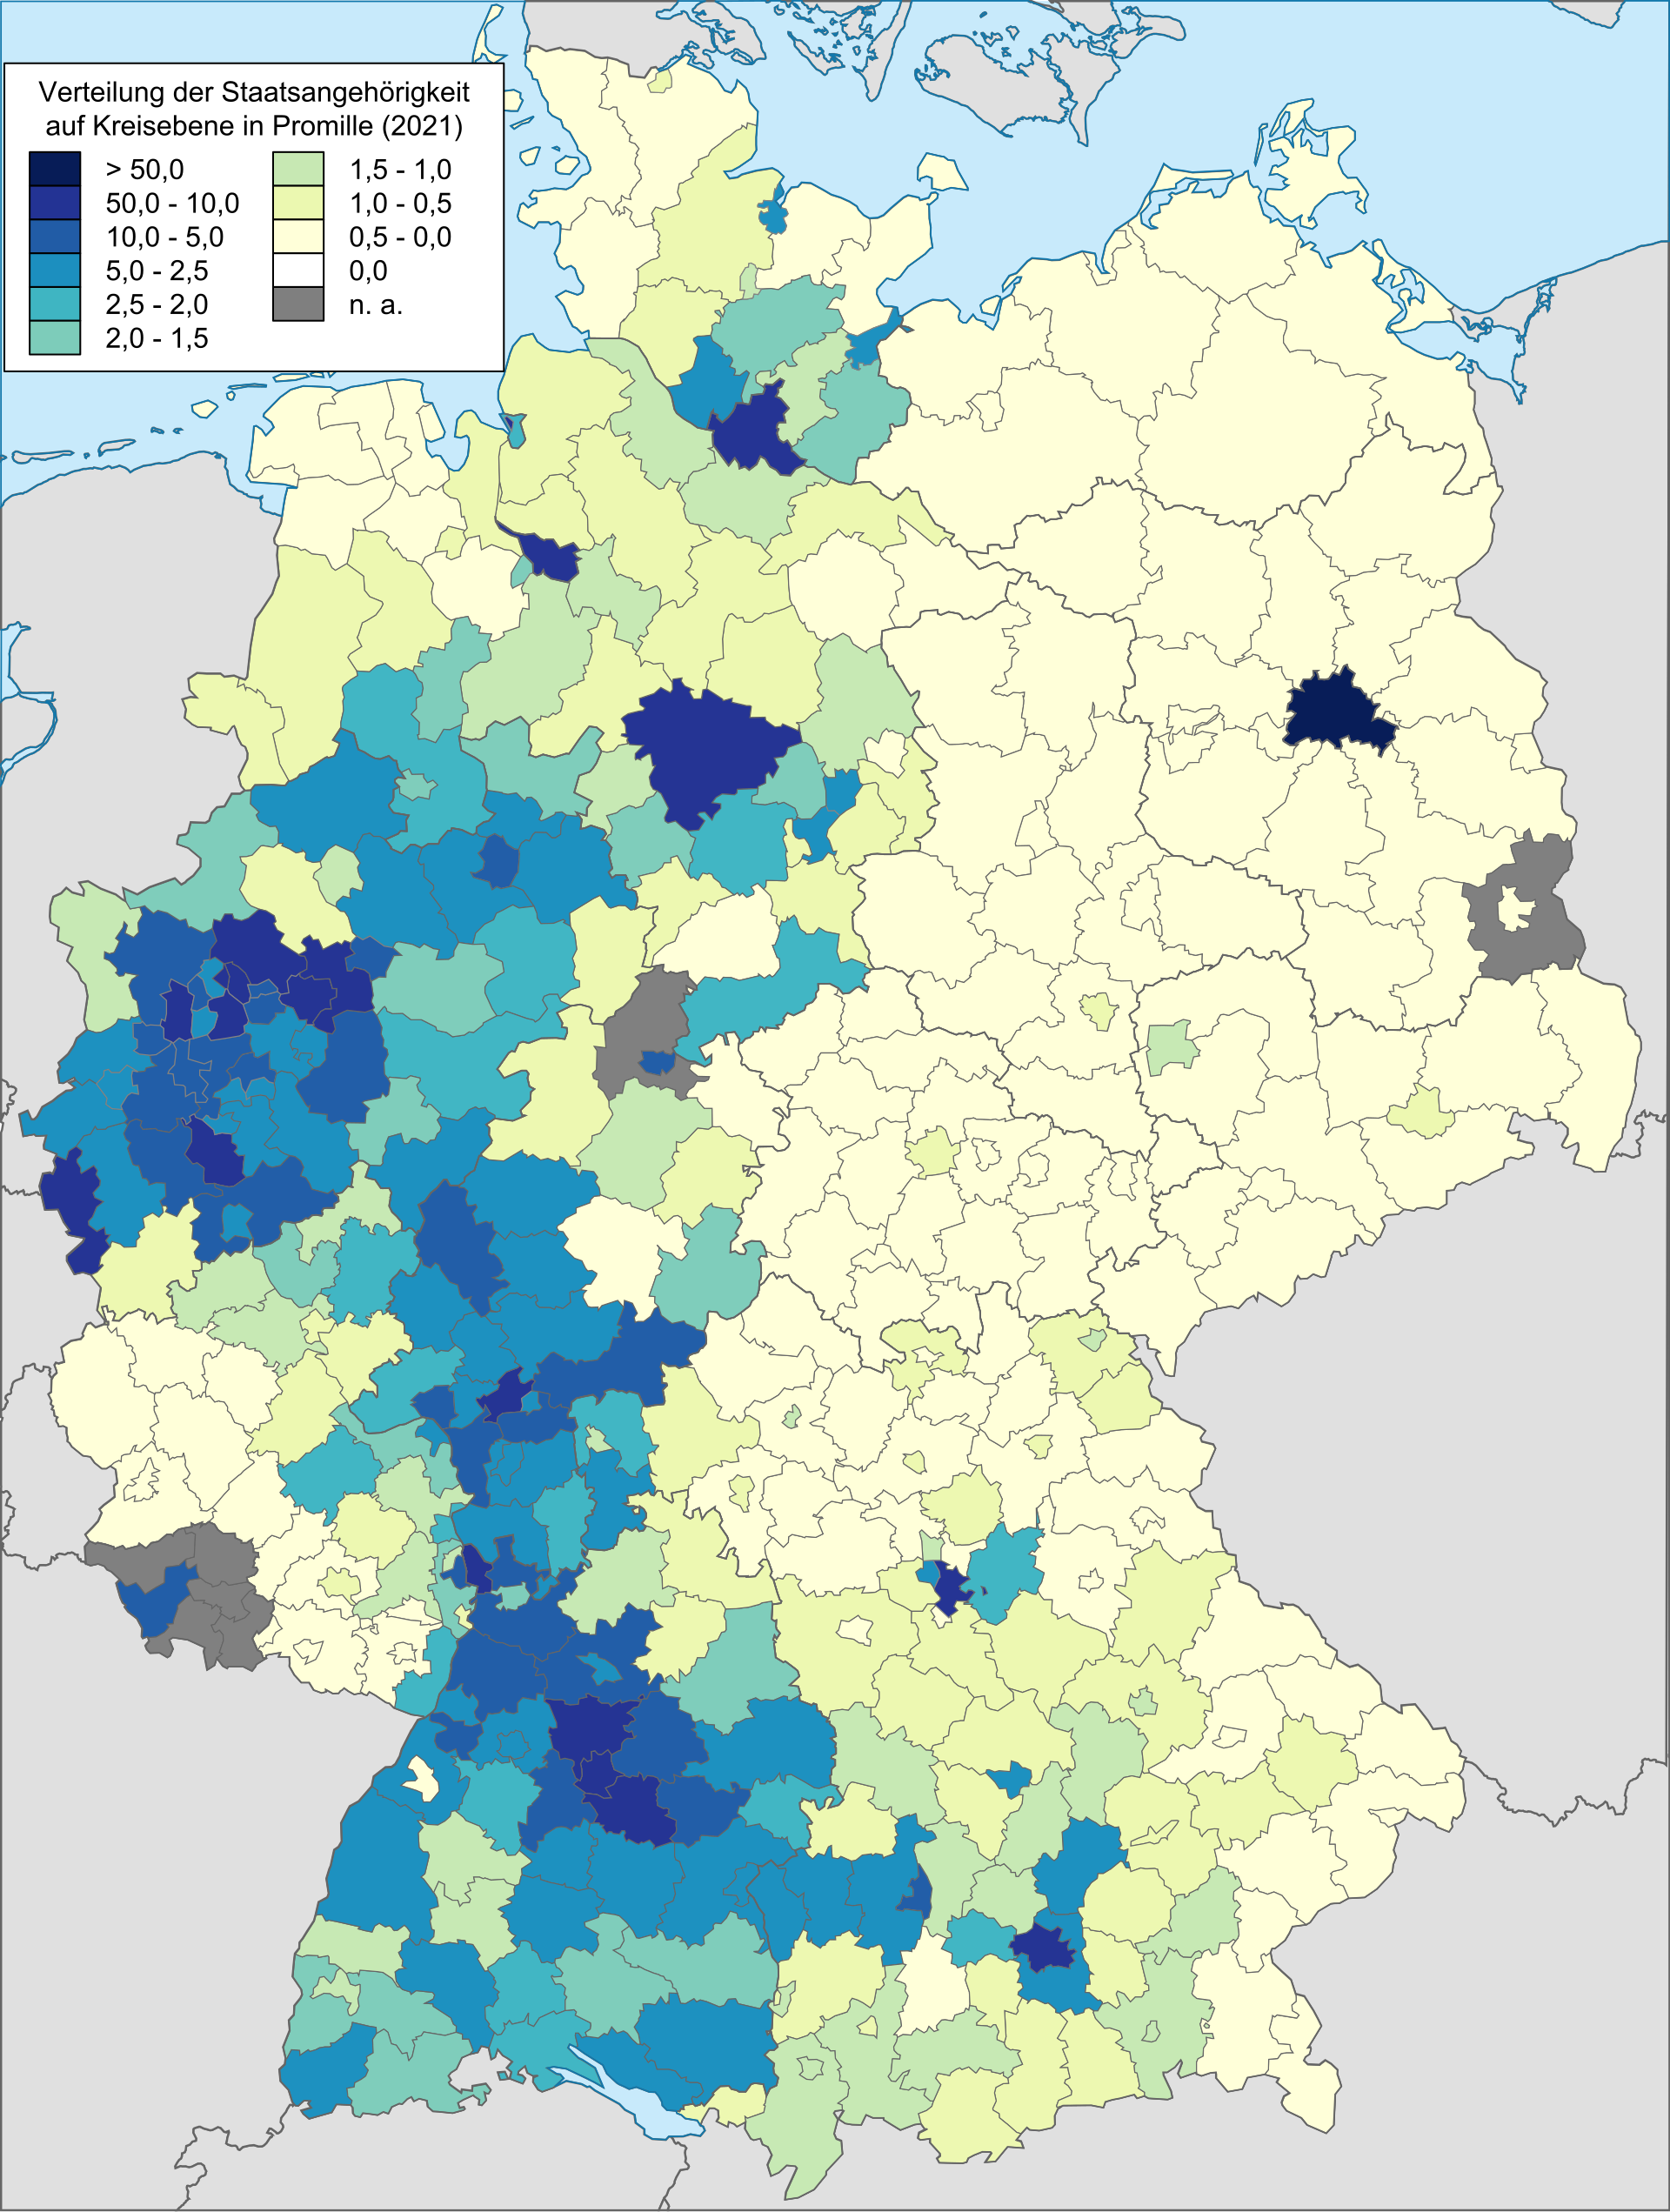 Distribution of Turkish citizens in districts of Germany in 2021